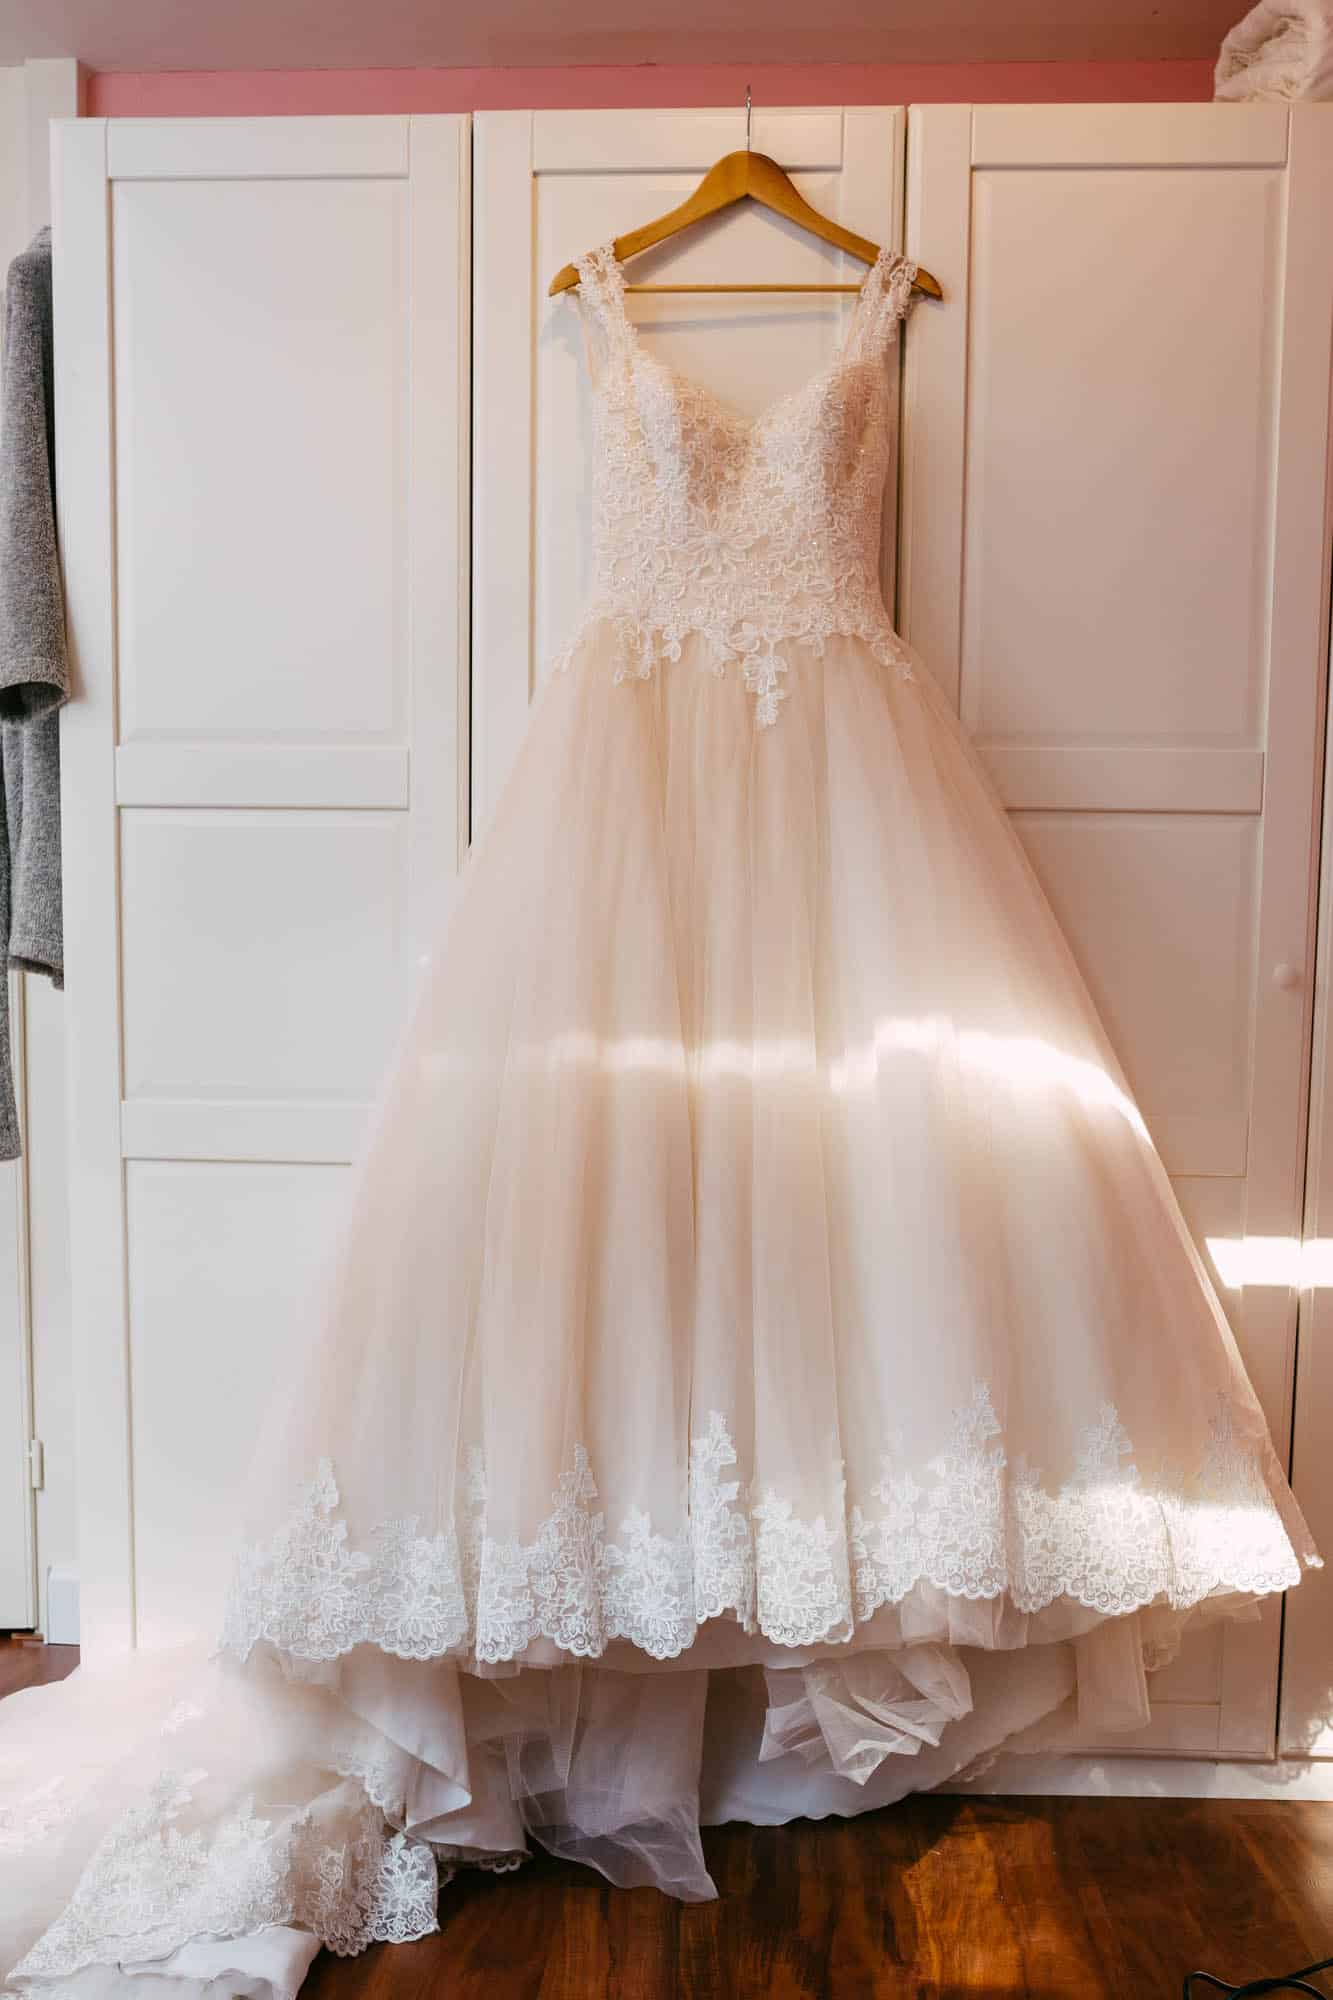 A beautiful A-line wedding dress hangs from a dresser in a beautifully decorated room.